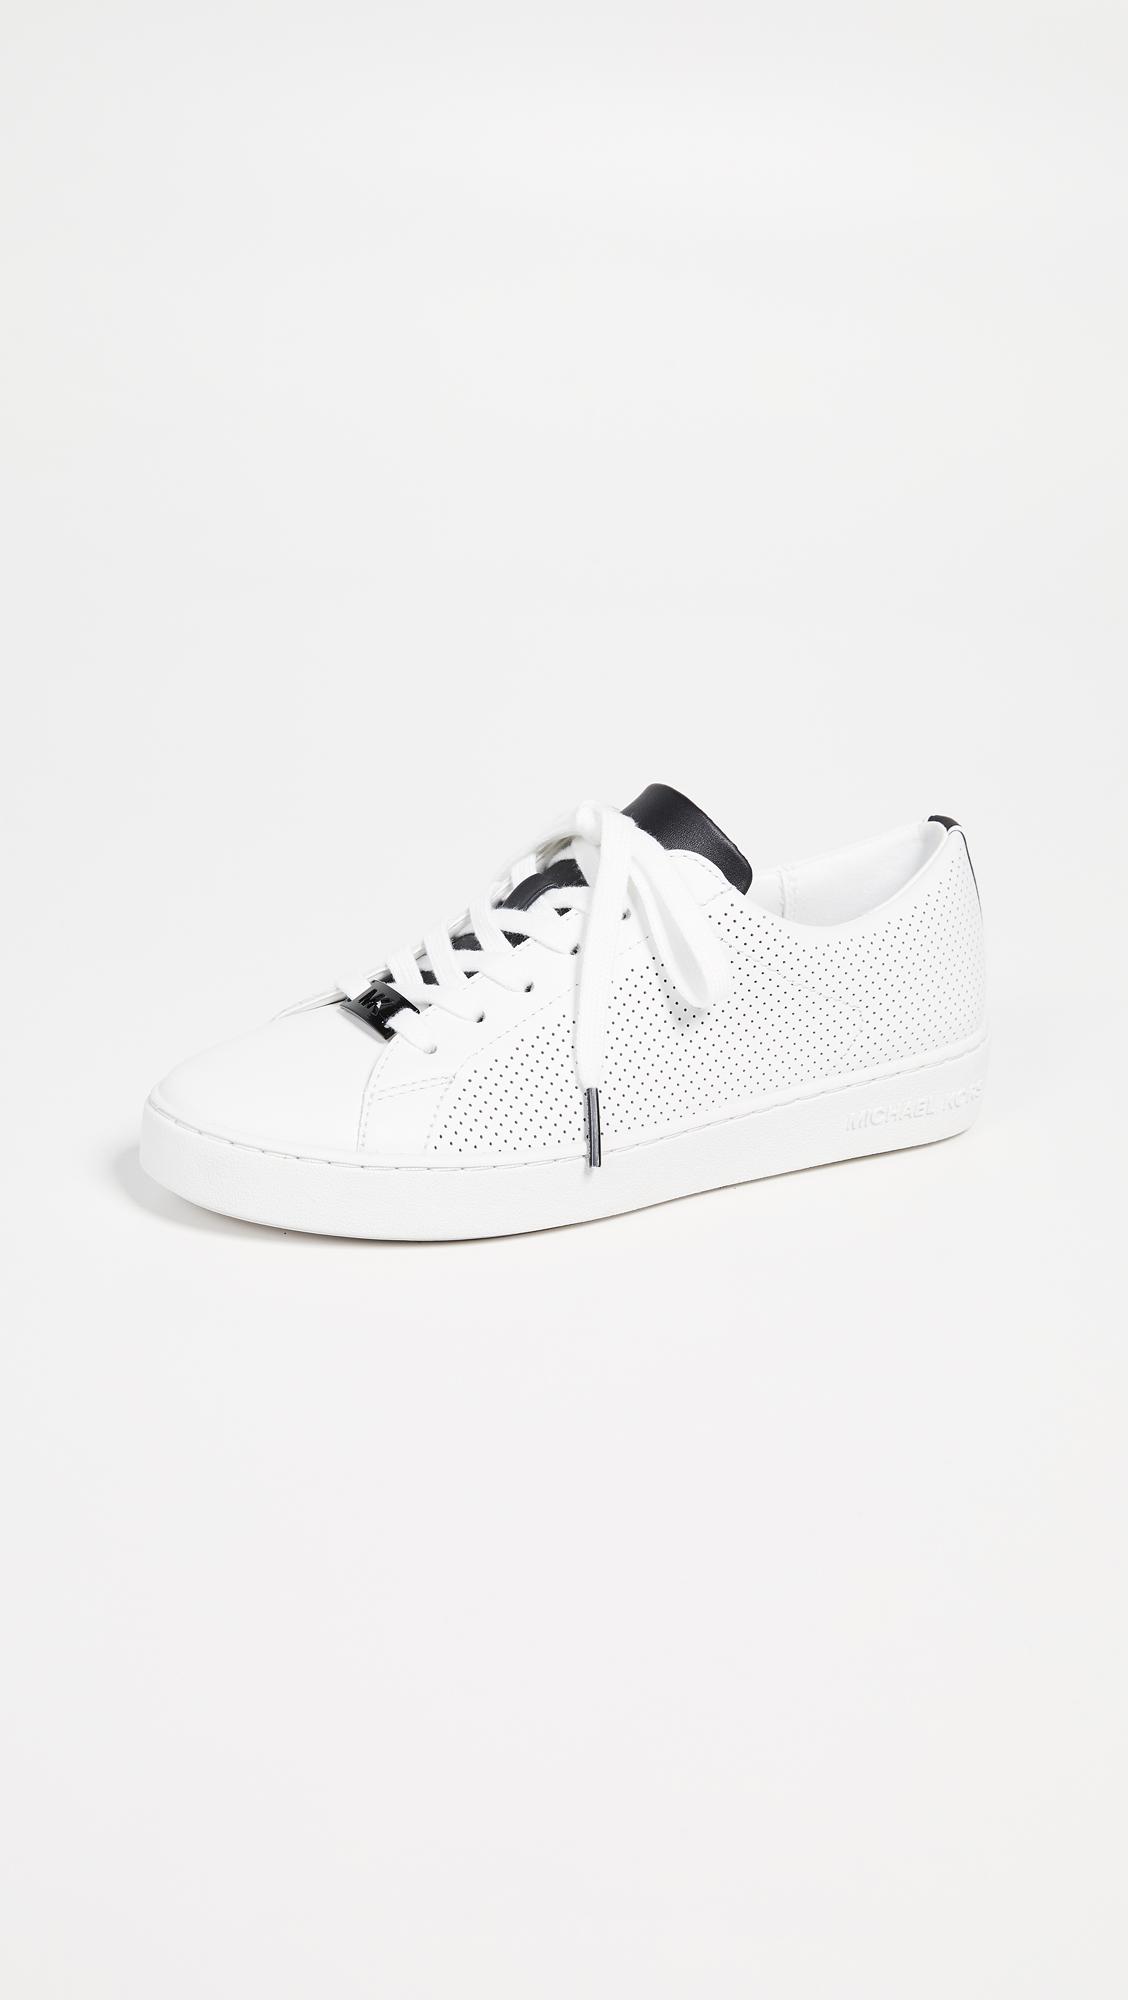 MICHAEL Michael Kors Keaton Lace Up Sneakers in White | Lyst